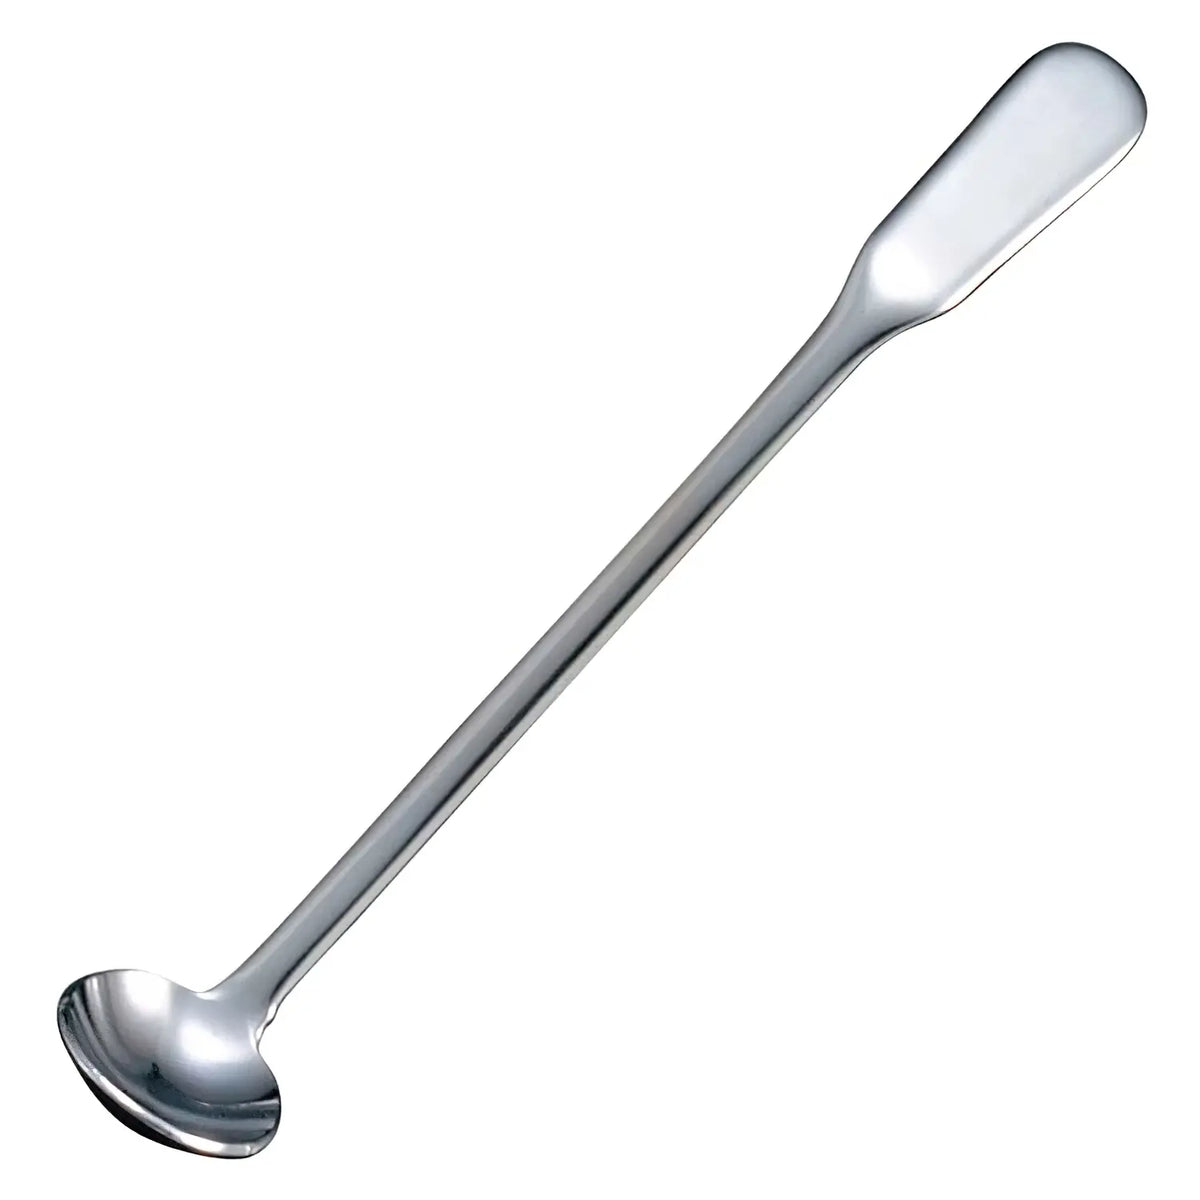 EBM Stainless Steel Chili Oil Spoon